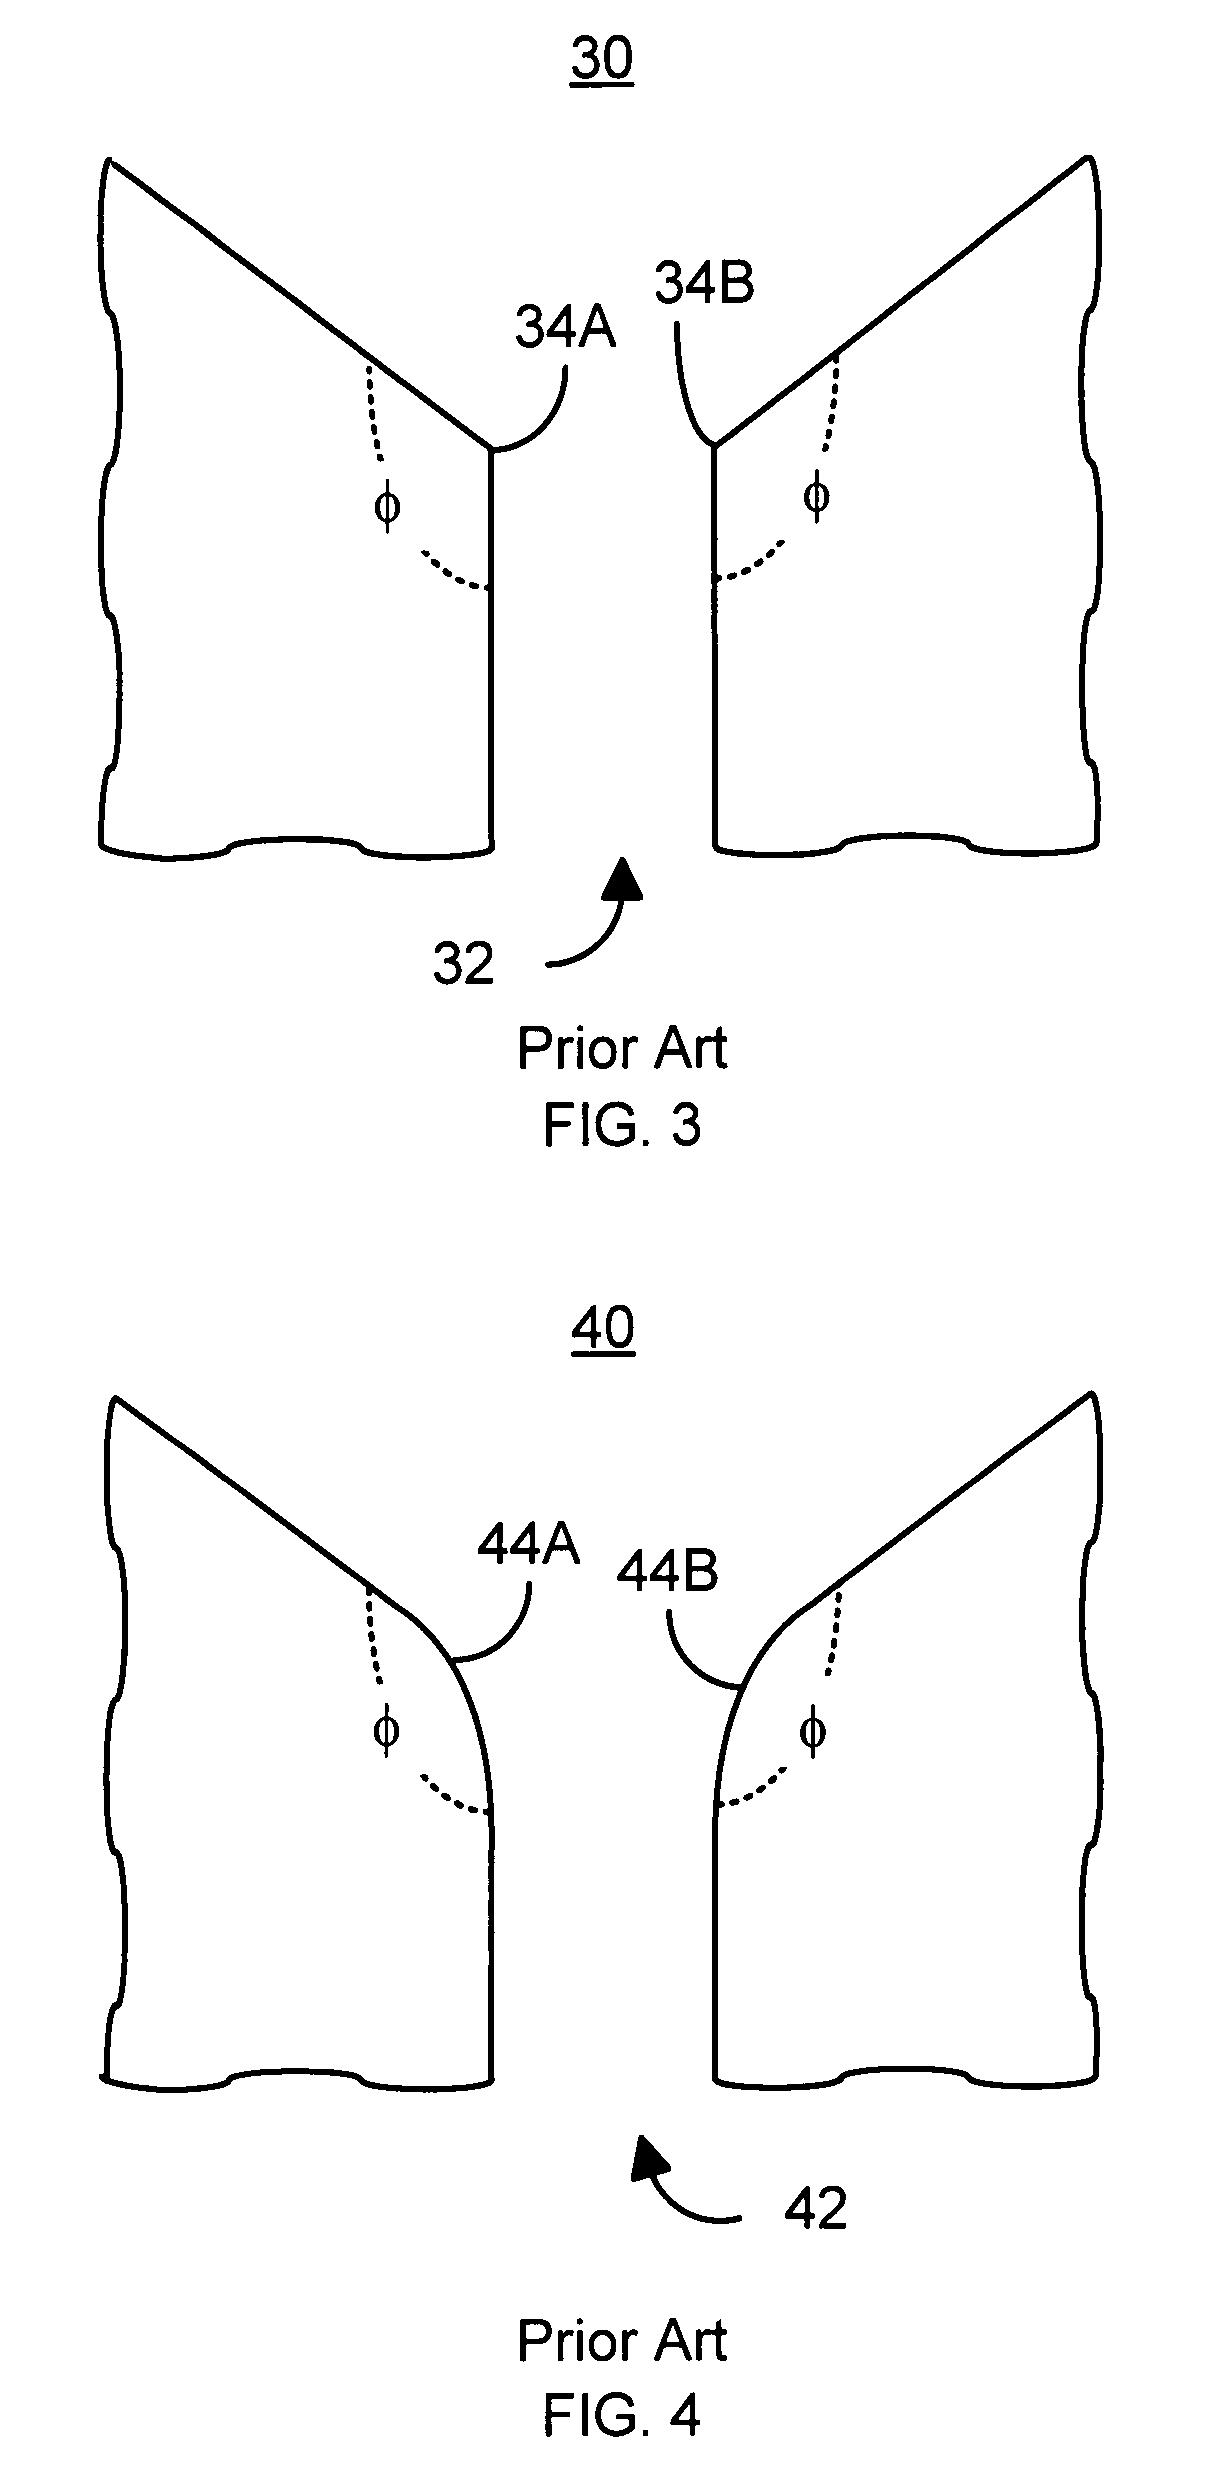 Method and system for providing optical proximity correction for structures such as a PMR nose